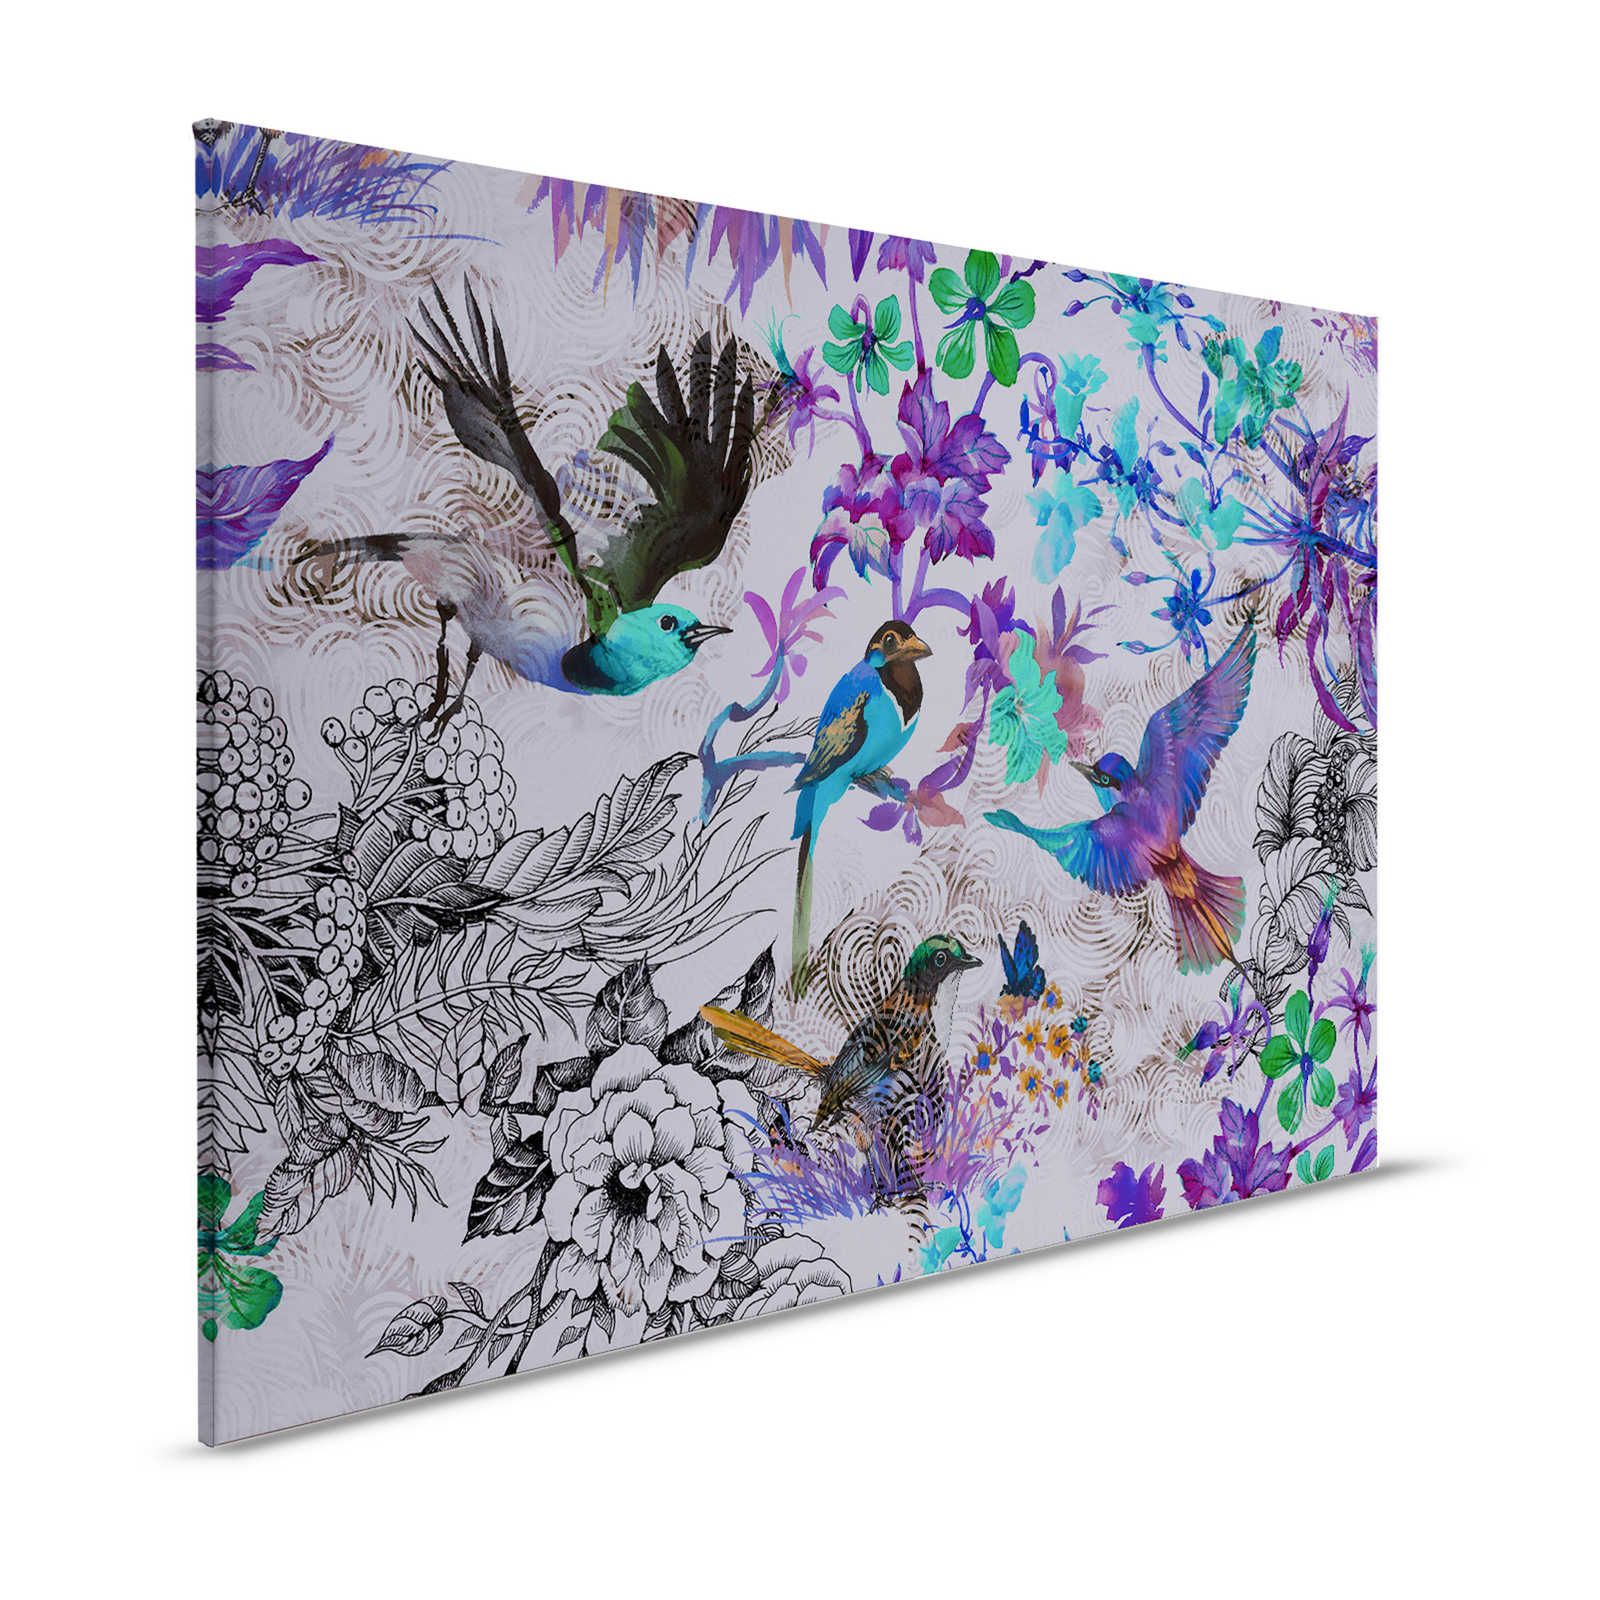 Purple Canvas Painting with Flowers & Birds - 1.20 m x 0.80 m
